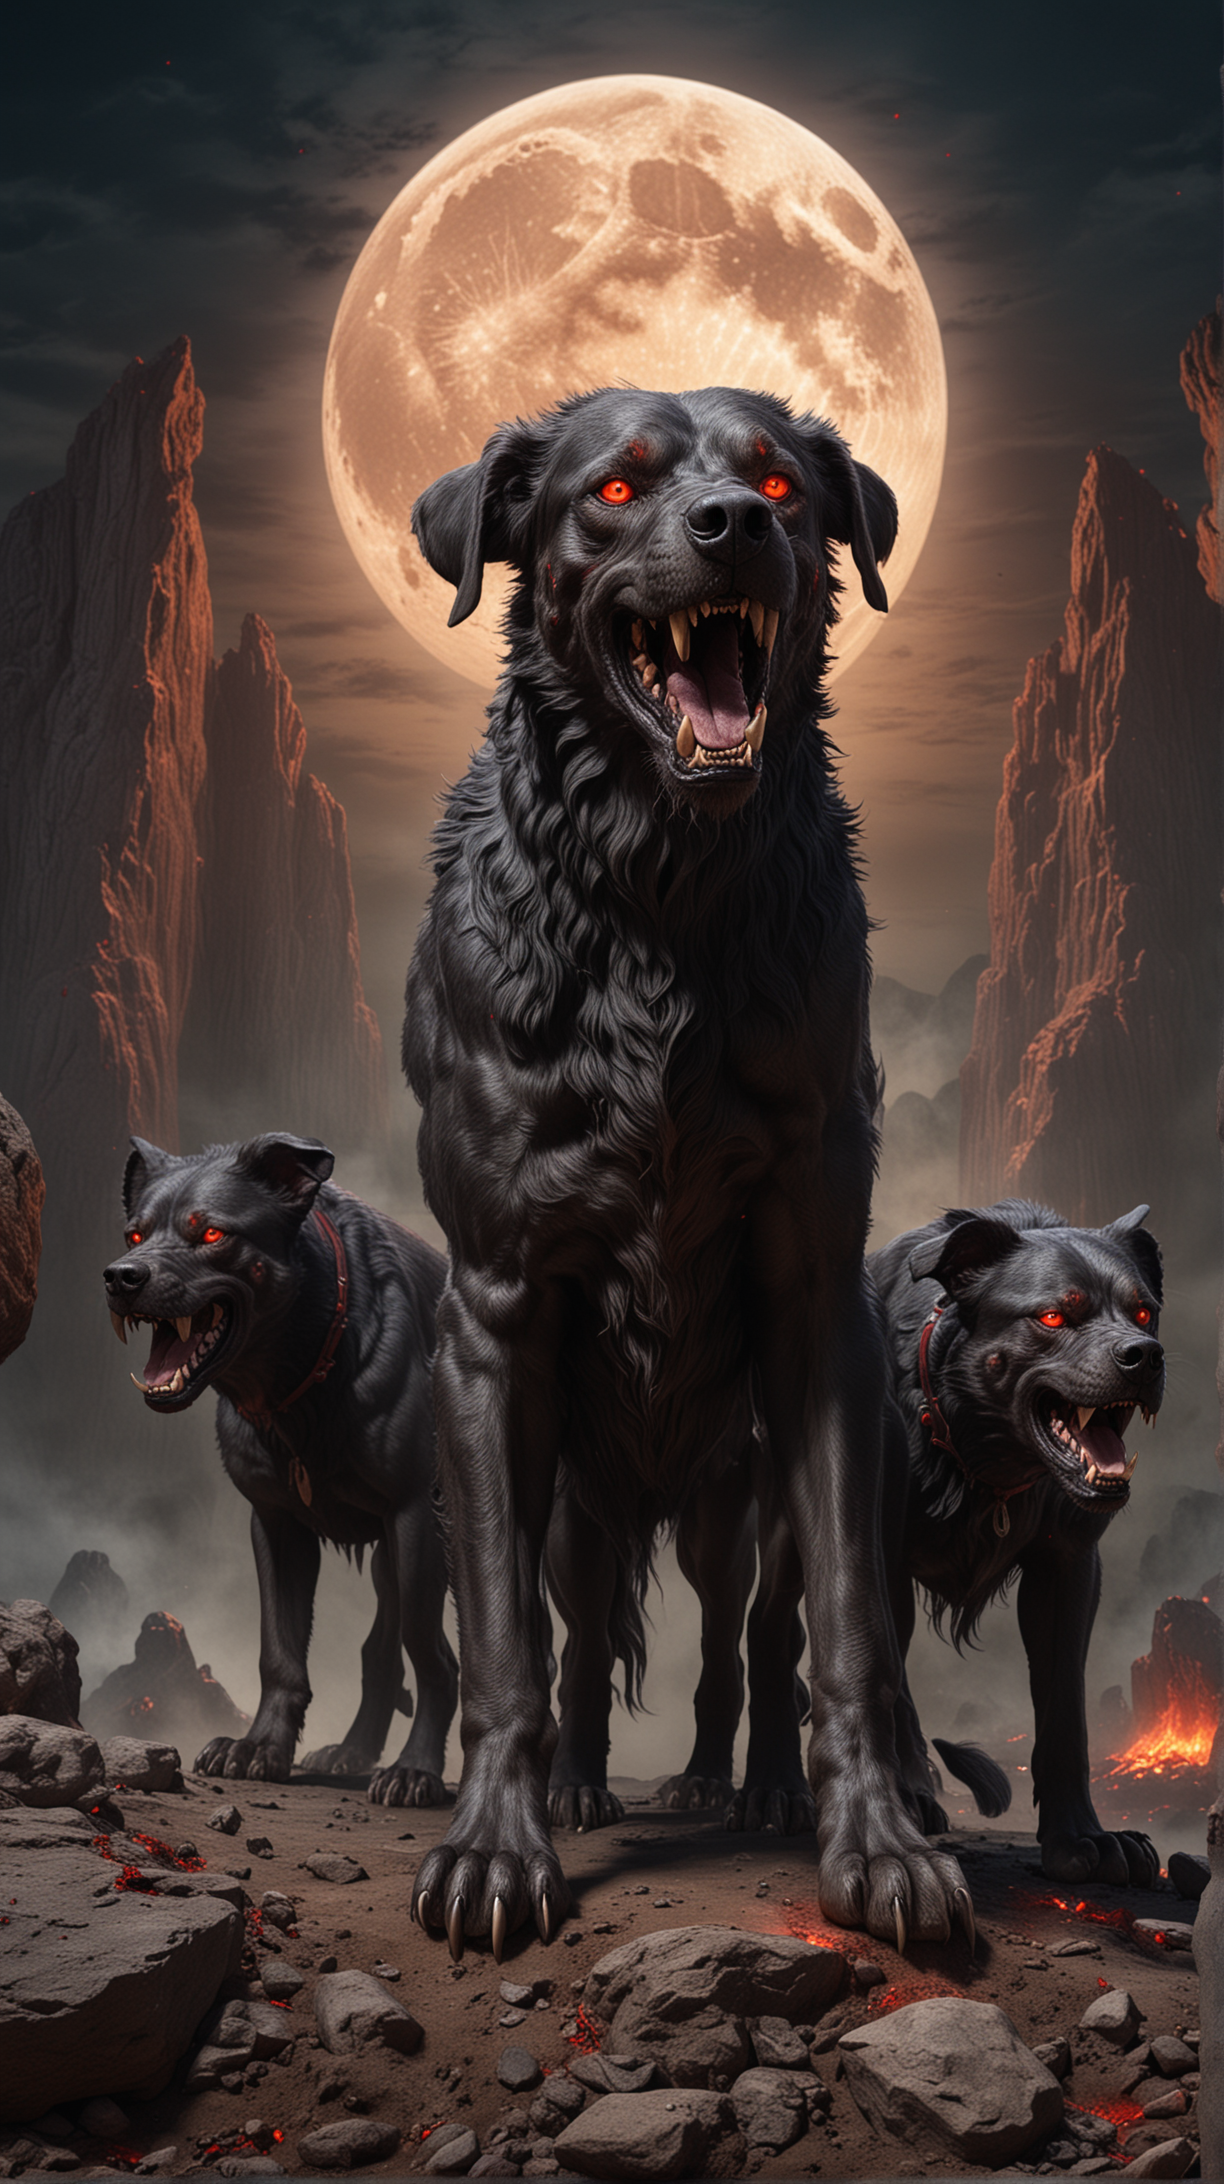 Giant Cerberus with Fiery Eyes and Moonlit Cave Background